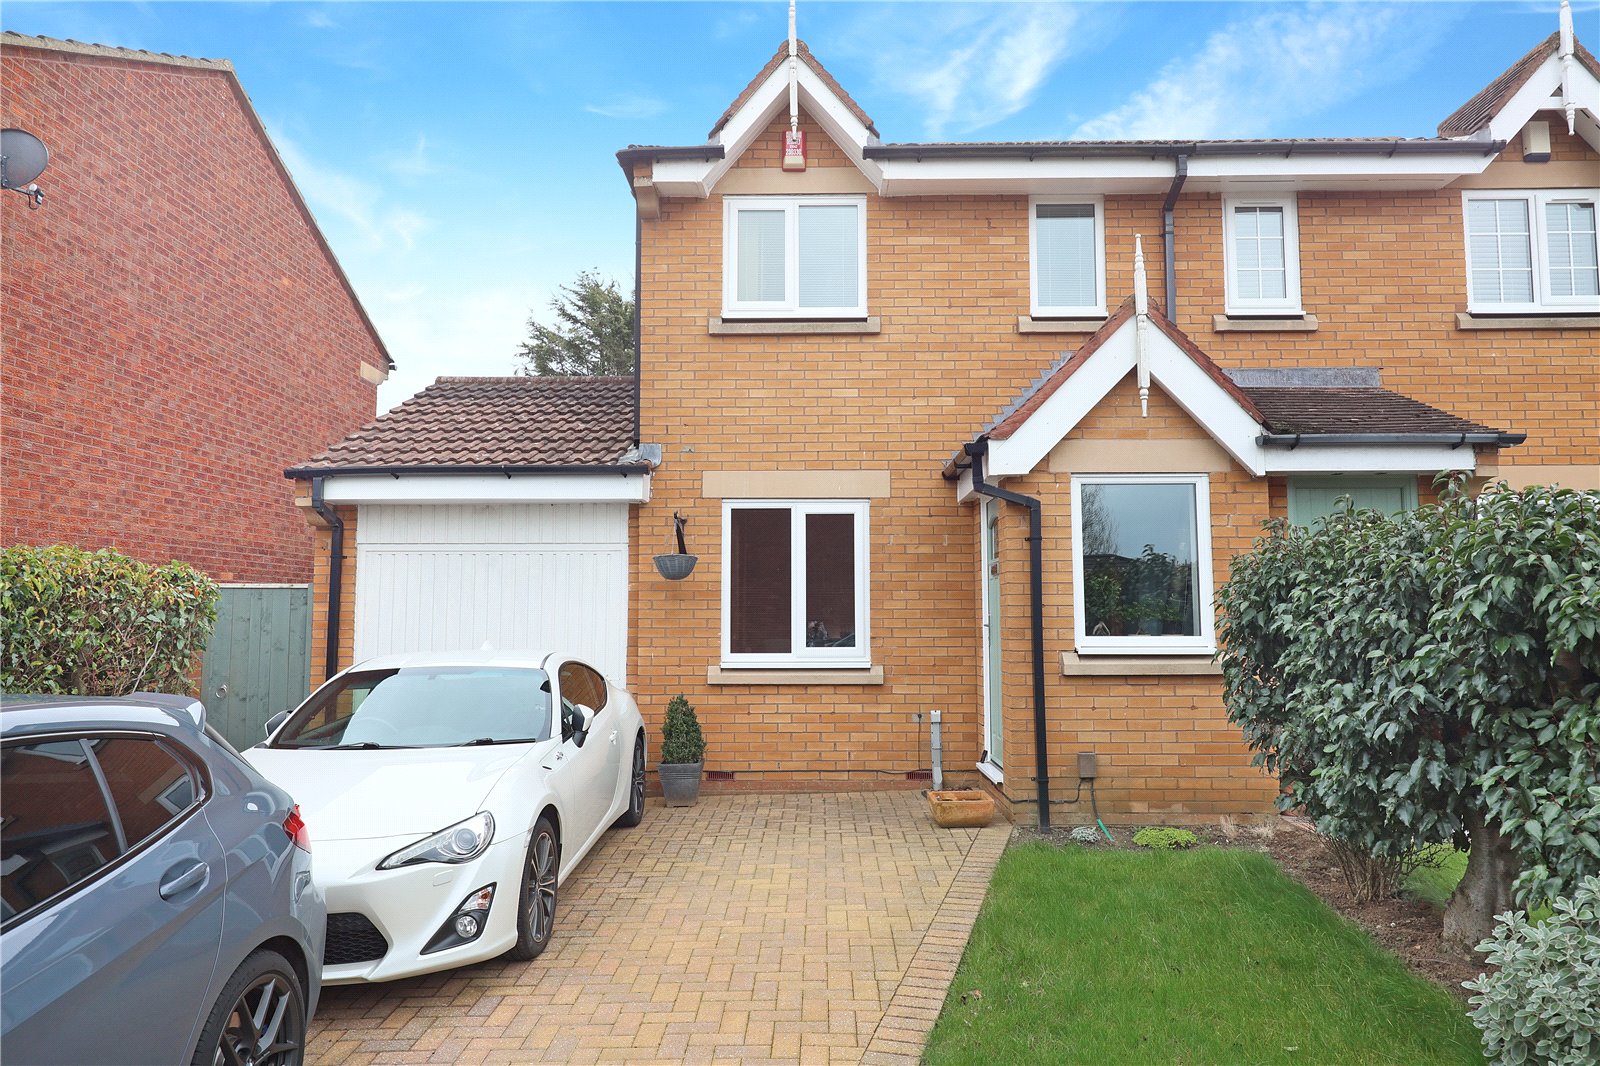 2 bed house for sale in Woodrush, Coulby Newham  - Property Image 1